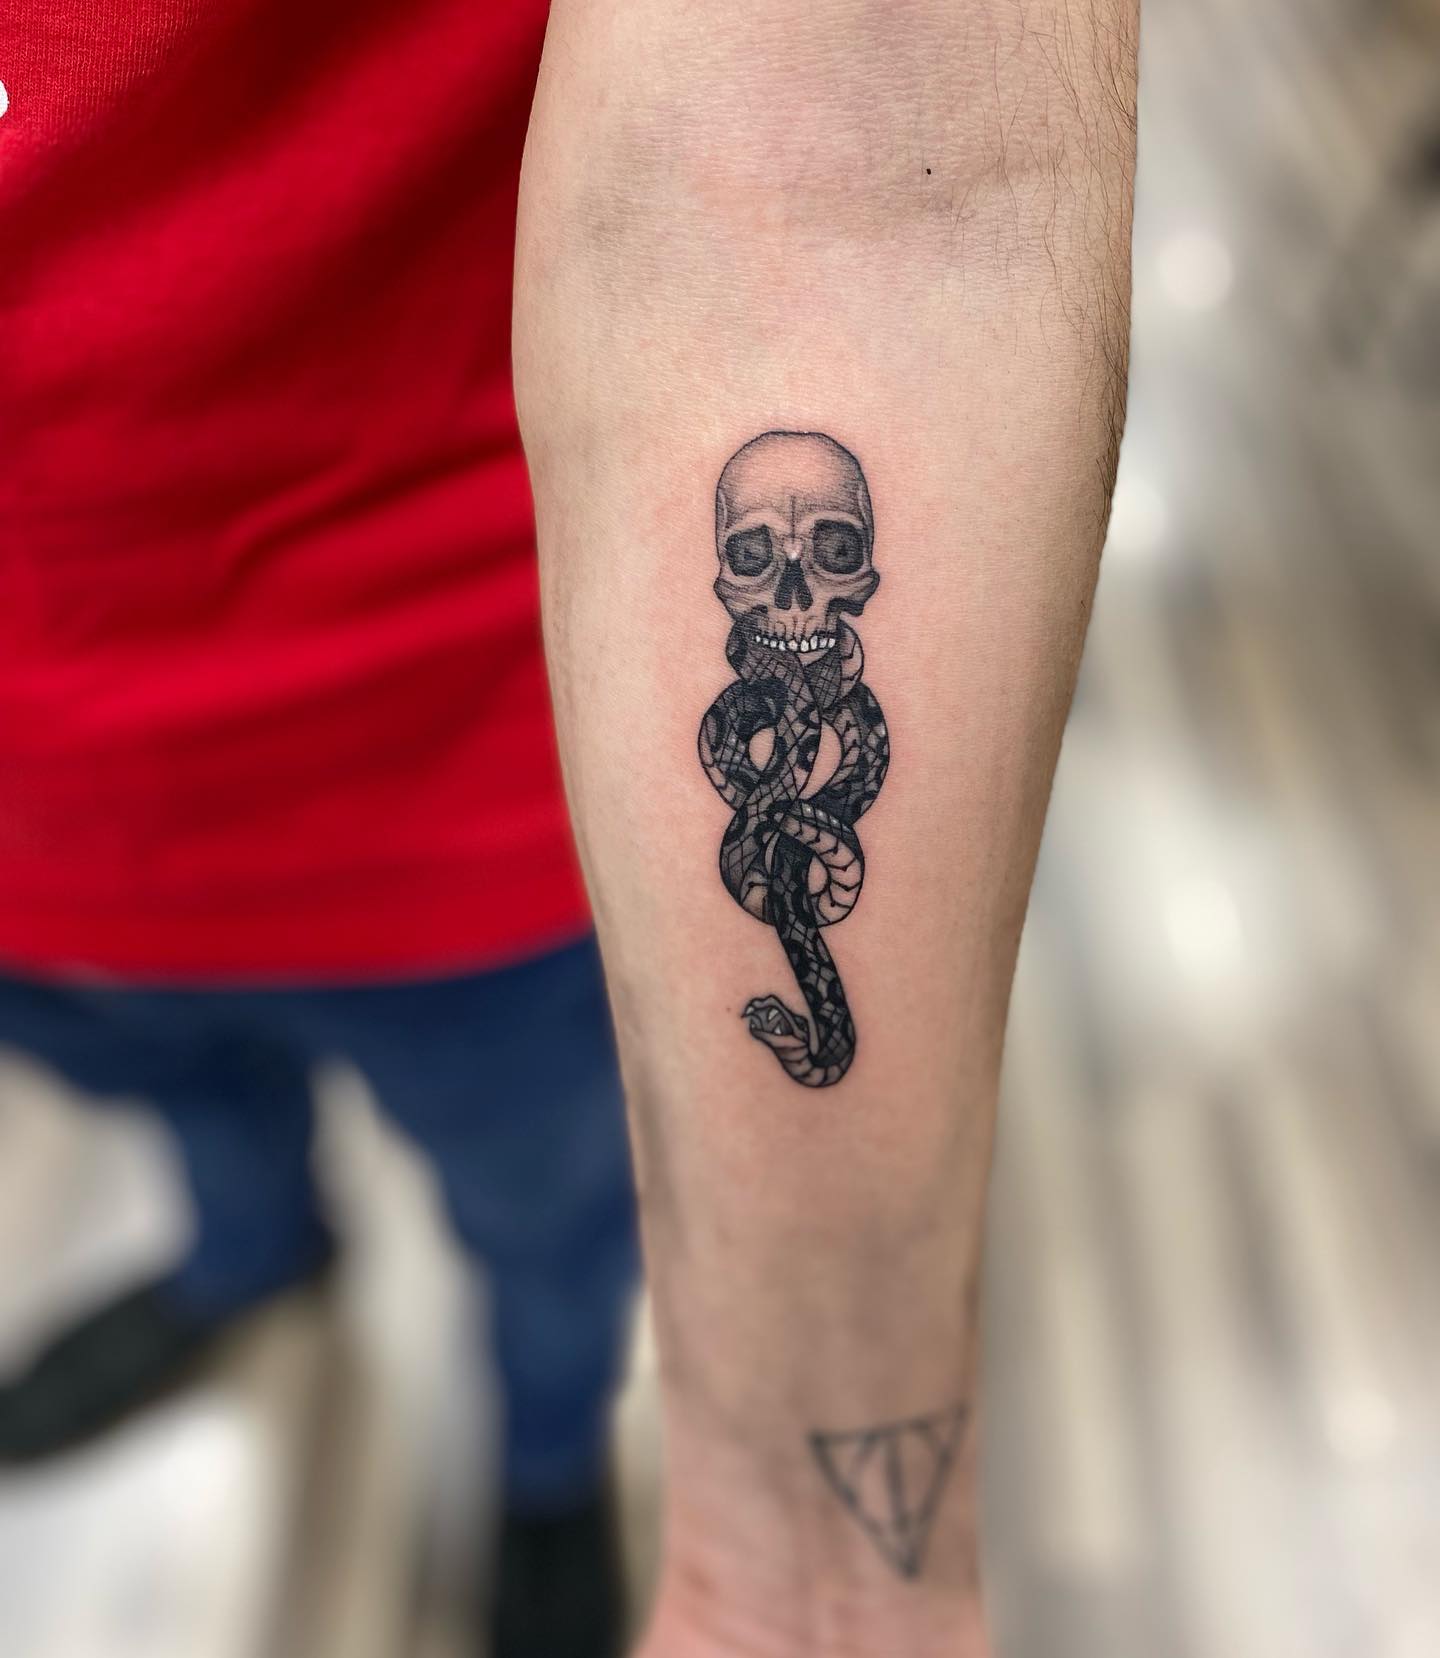 Death eaters were particularly nasty towards muggles, muggle-borns, half-bloods, and anyone who opposed them. If you want to get a minimal tattoo of them, you and get it on your forearm.